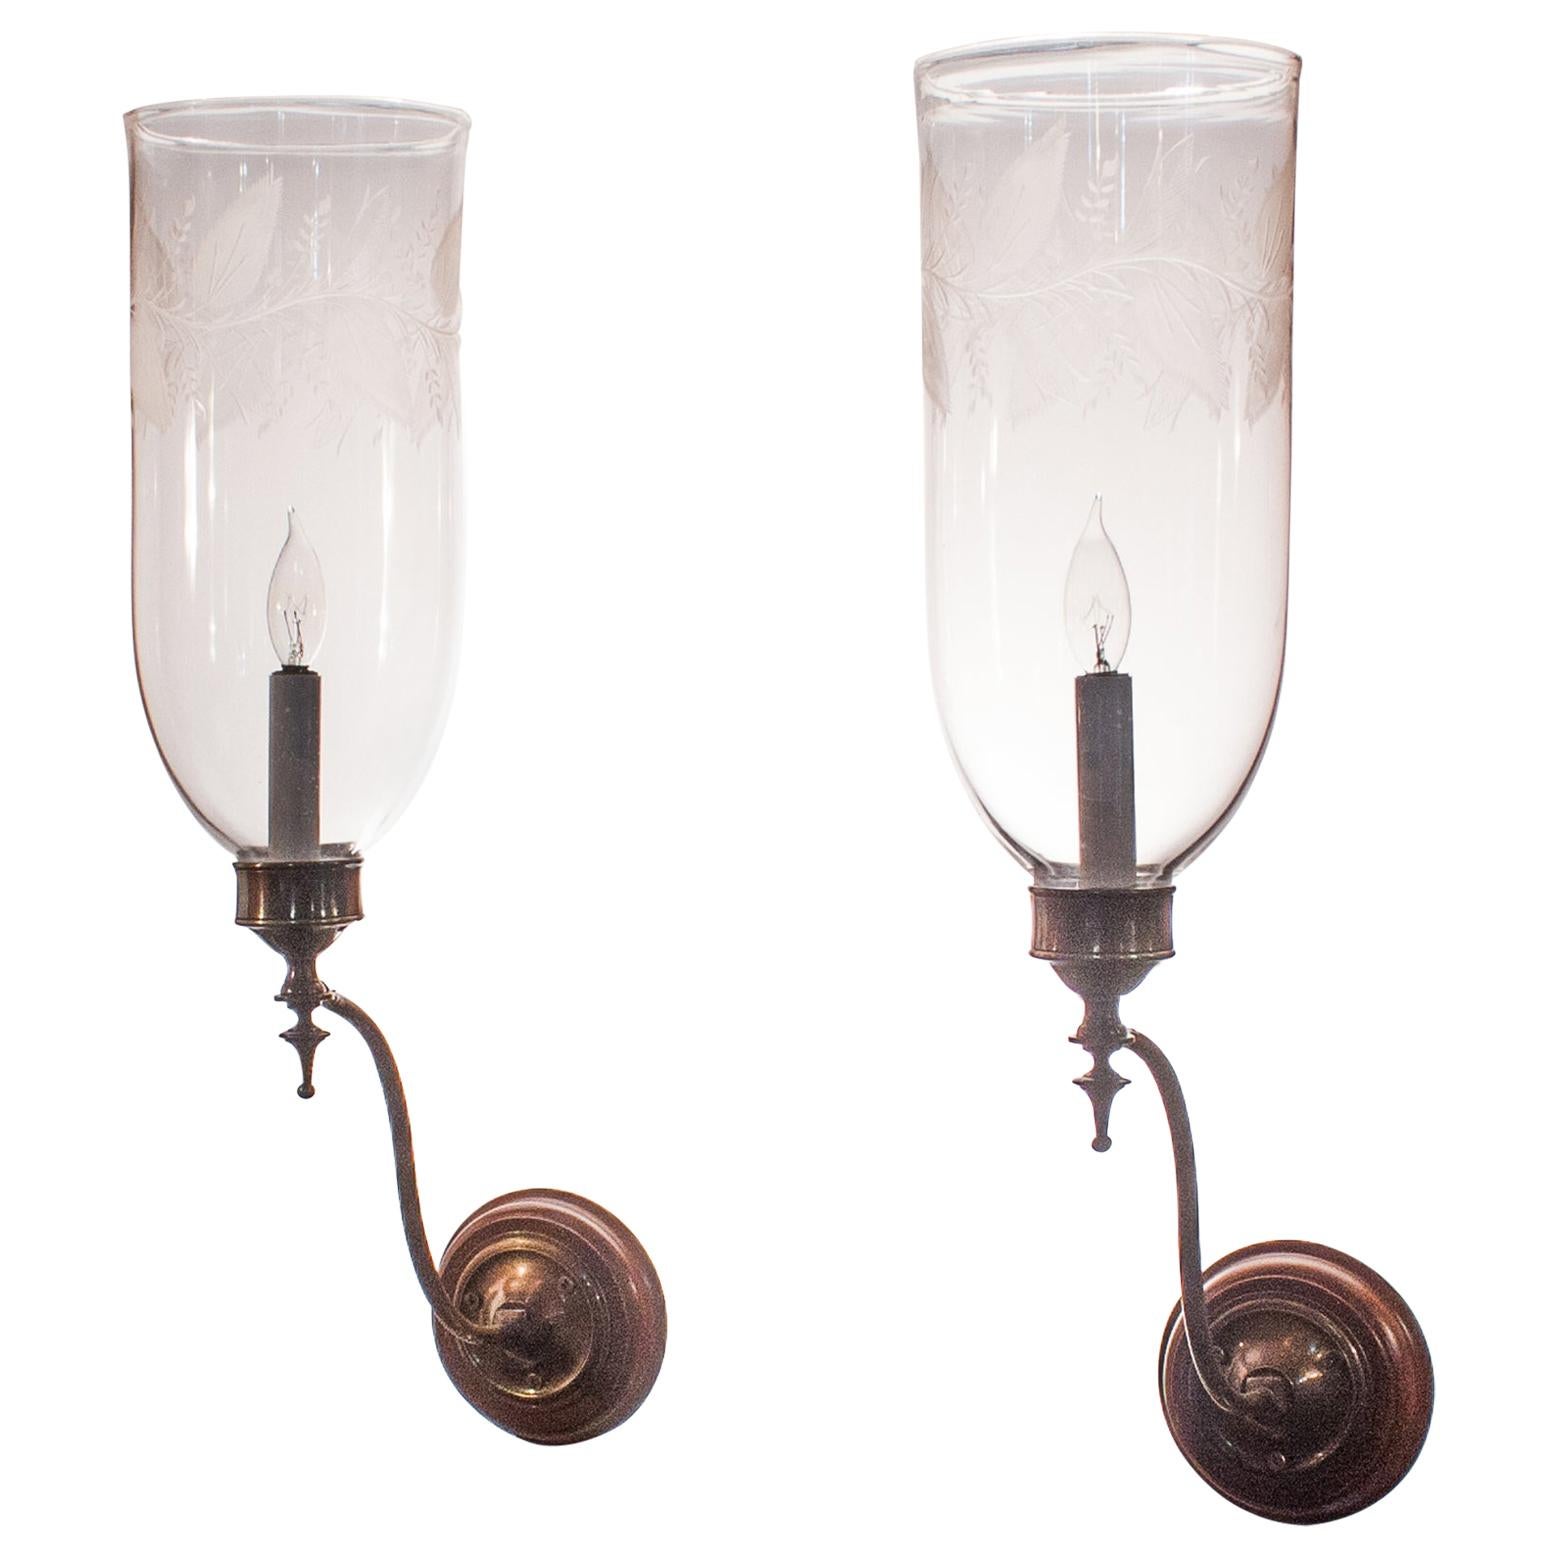 Pair of Antique Hurricane Shade Wall Sconces with Leaf Etching